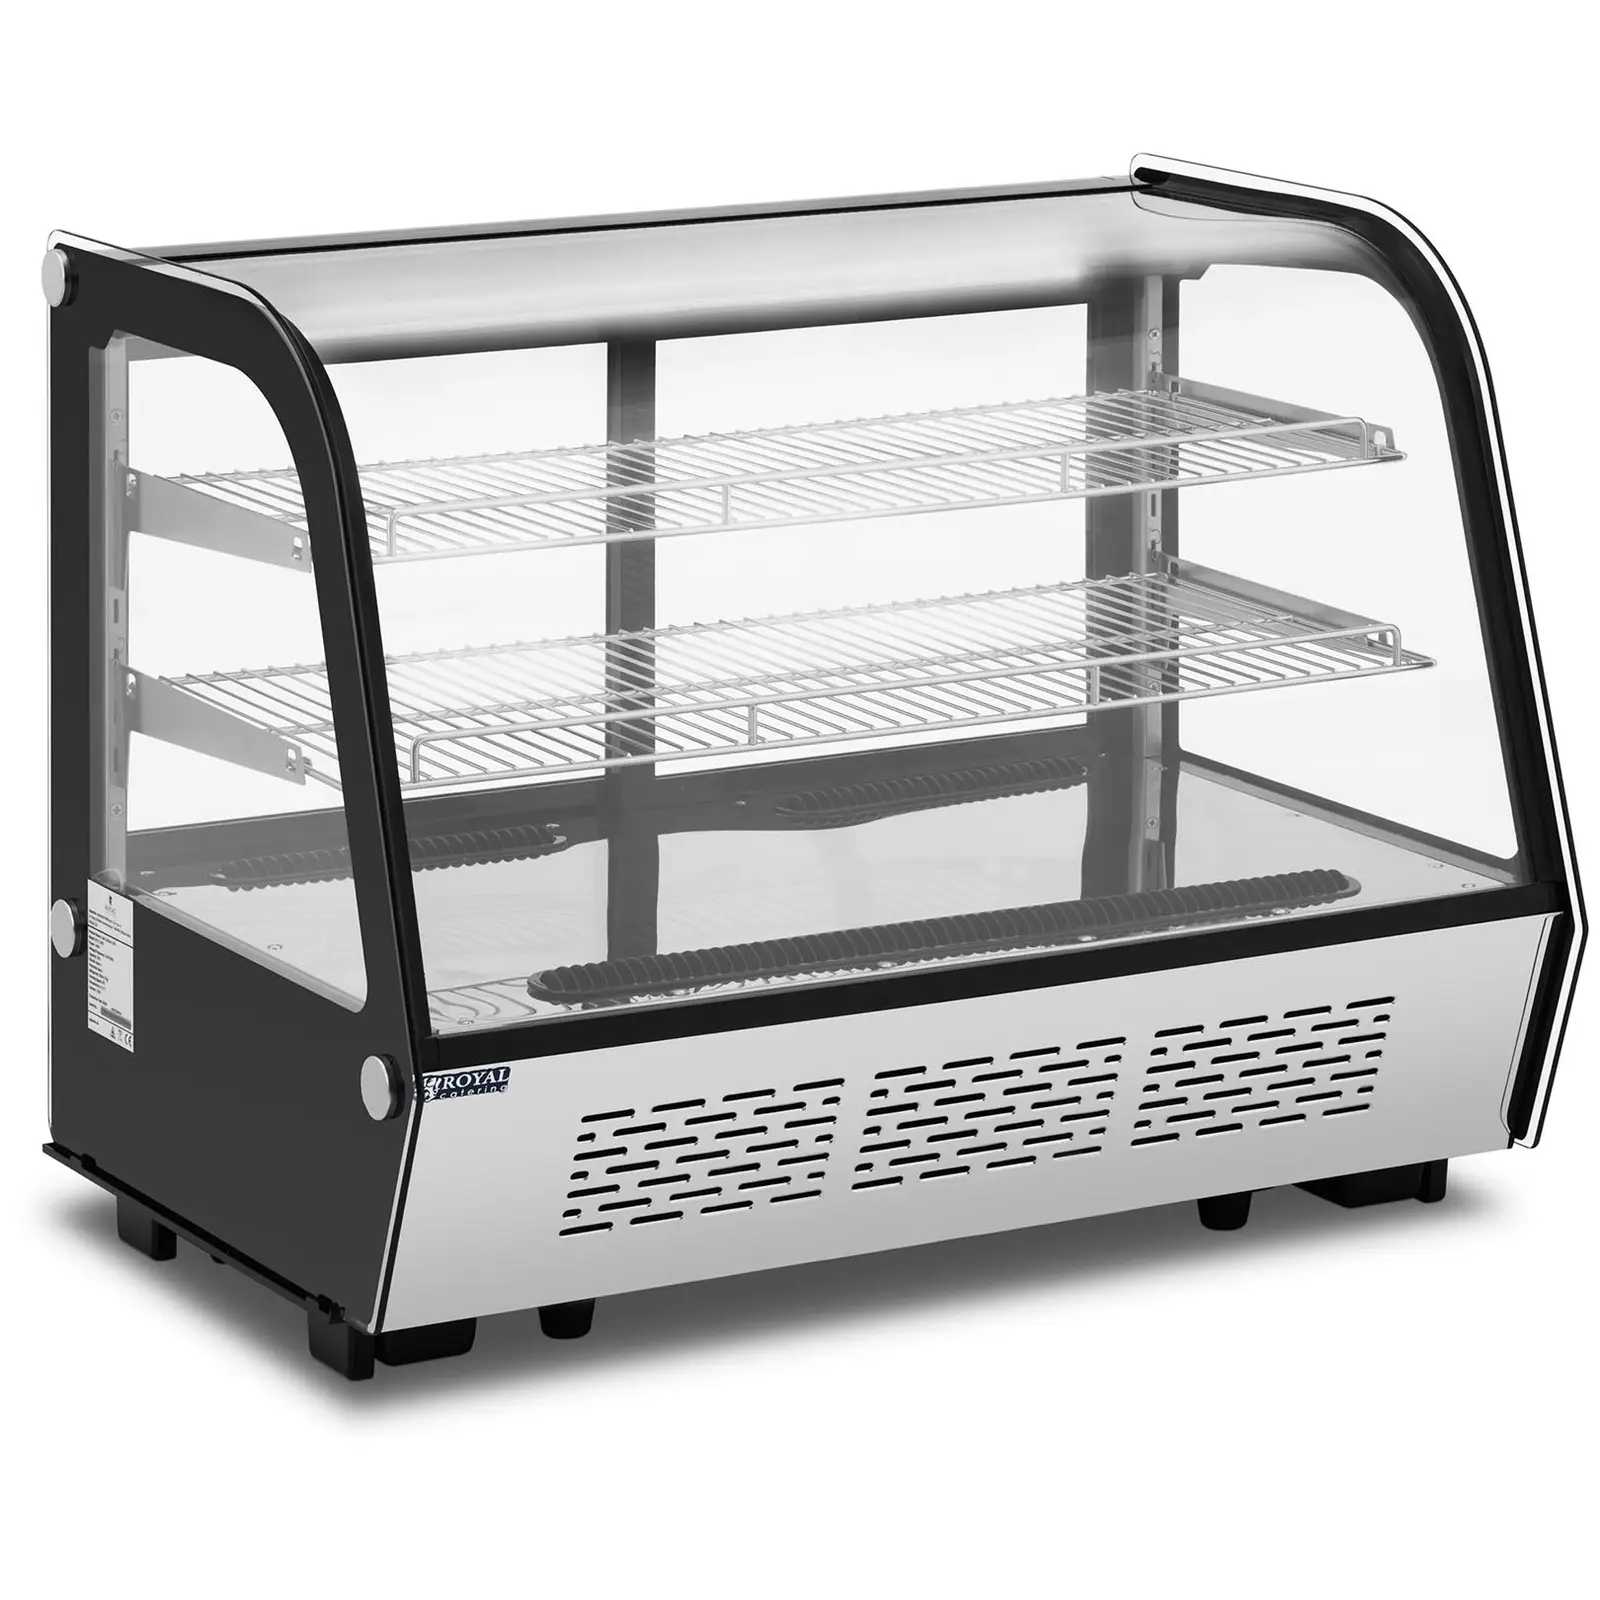 Refrigerated Display Case - 160 L - Royal Catering - 3 levels - stainless steel